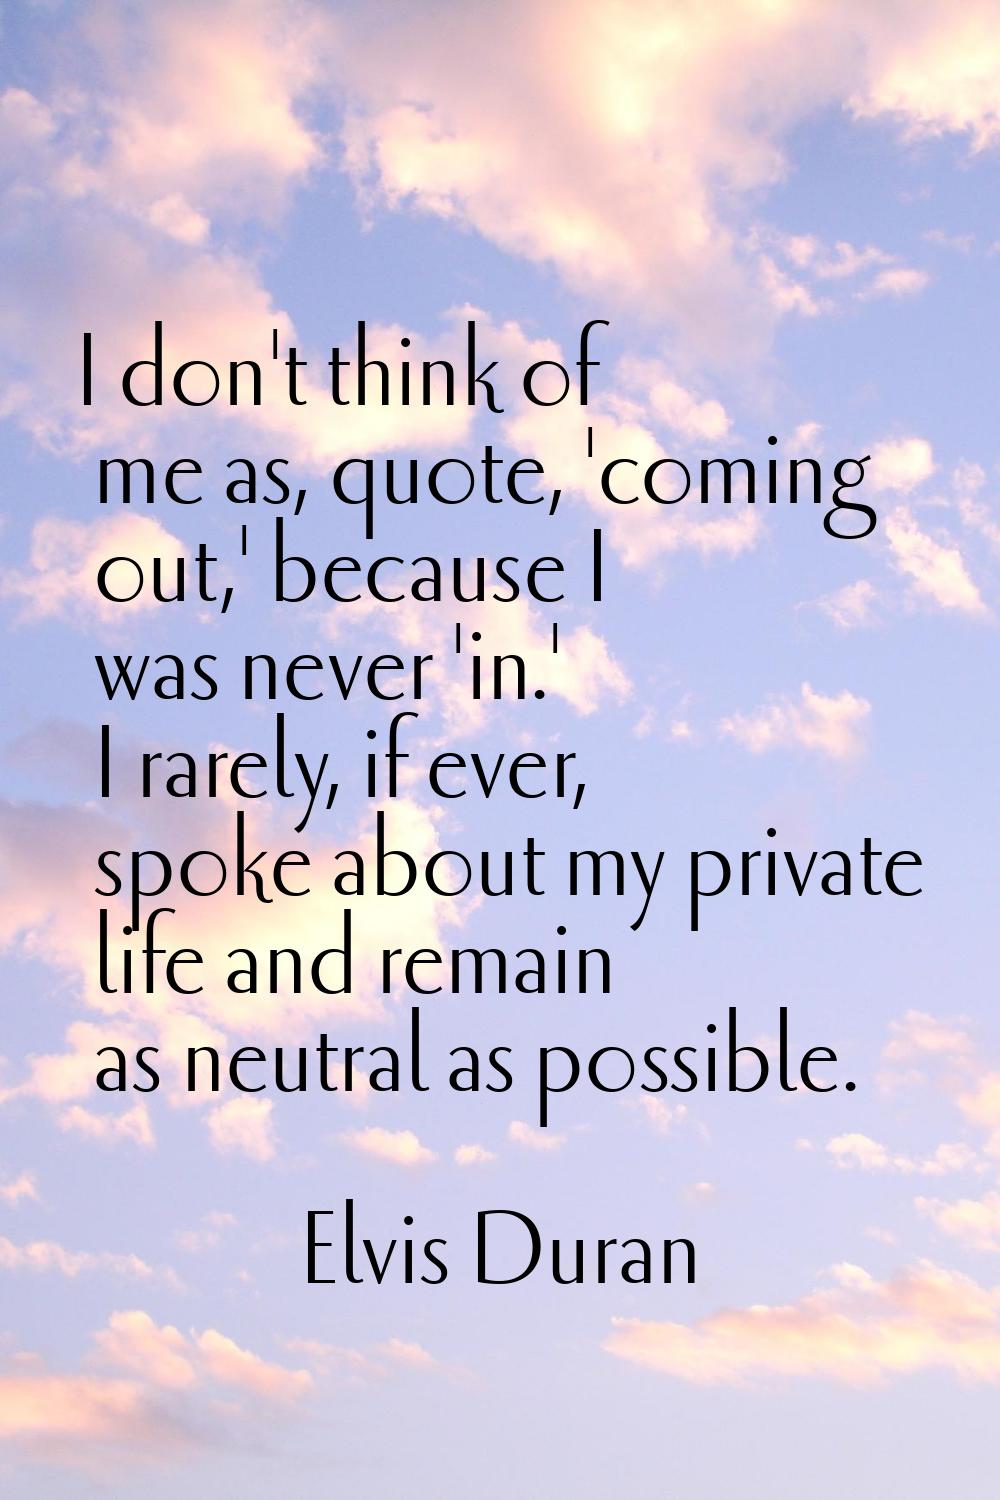 I don't think of me as, quote, 'coming out,' because I was never 'in.' I rarely, if ever, spoke abo